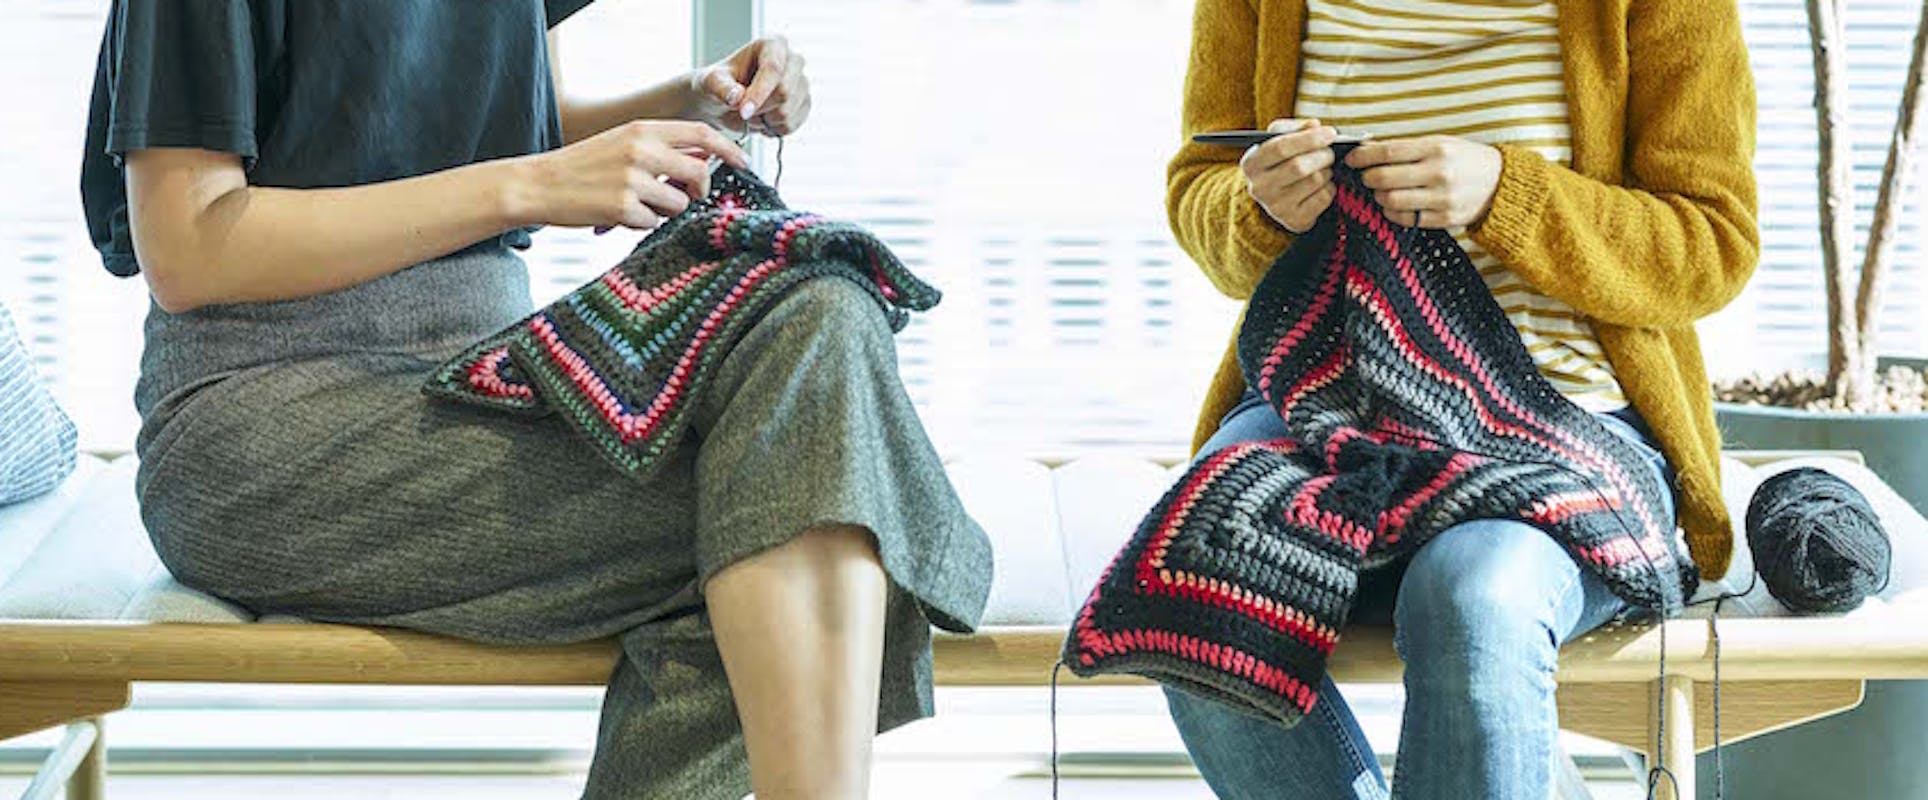 Knitting vs Crochet: What's the difference?